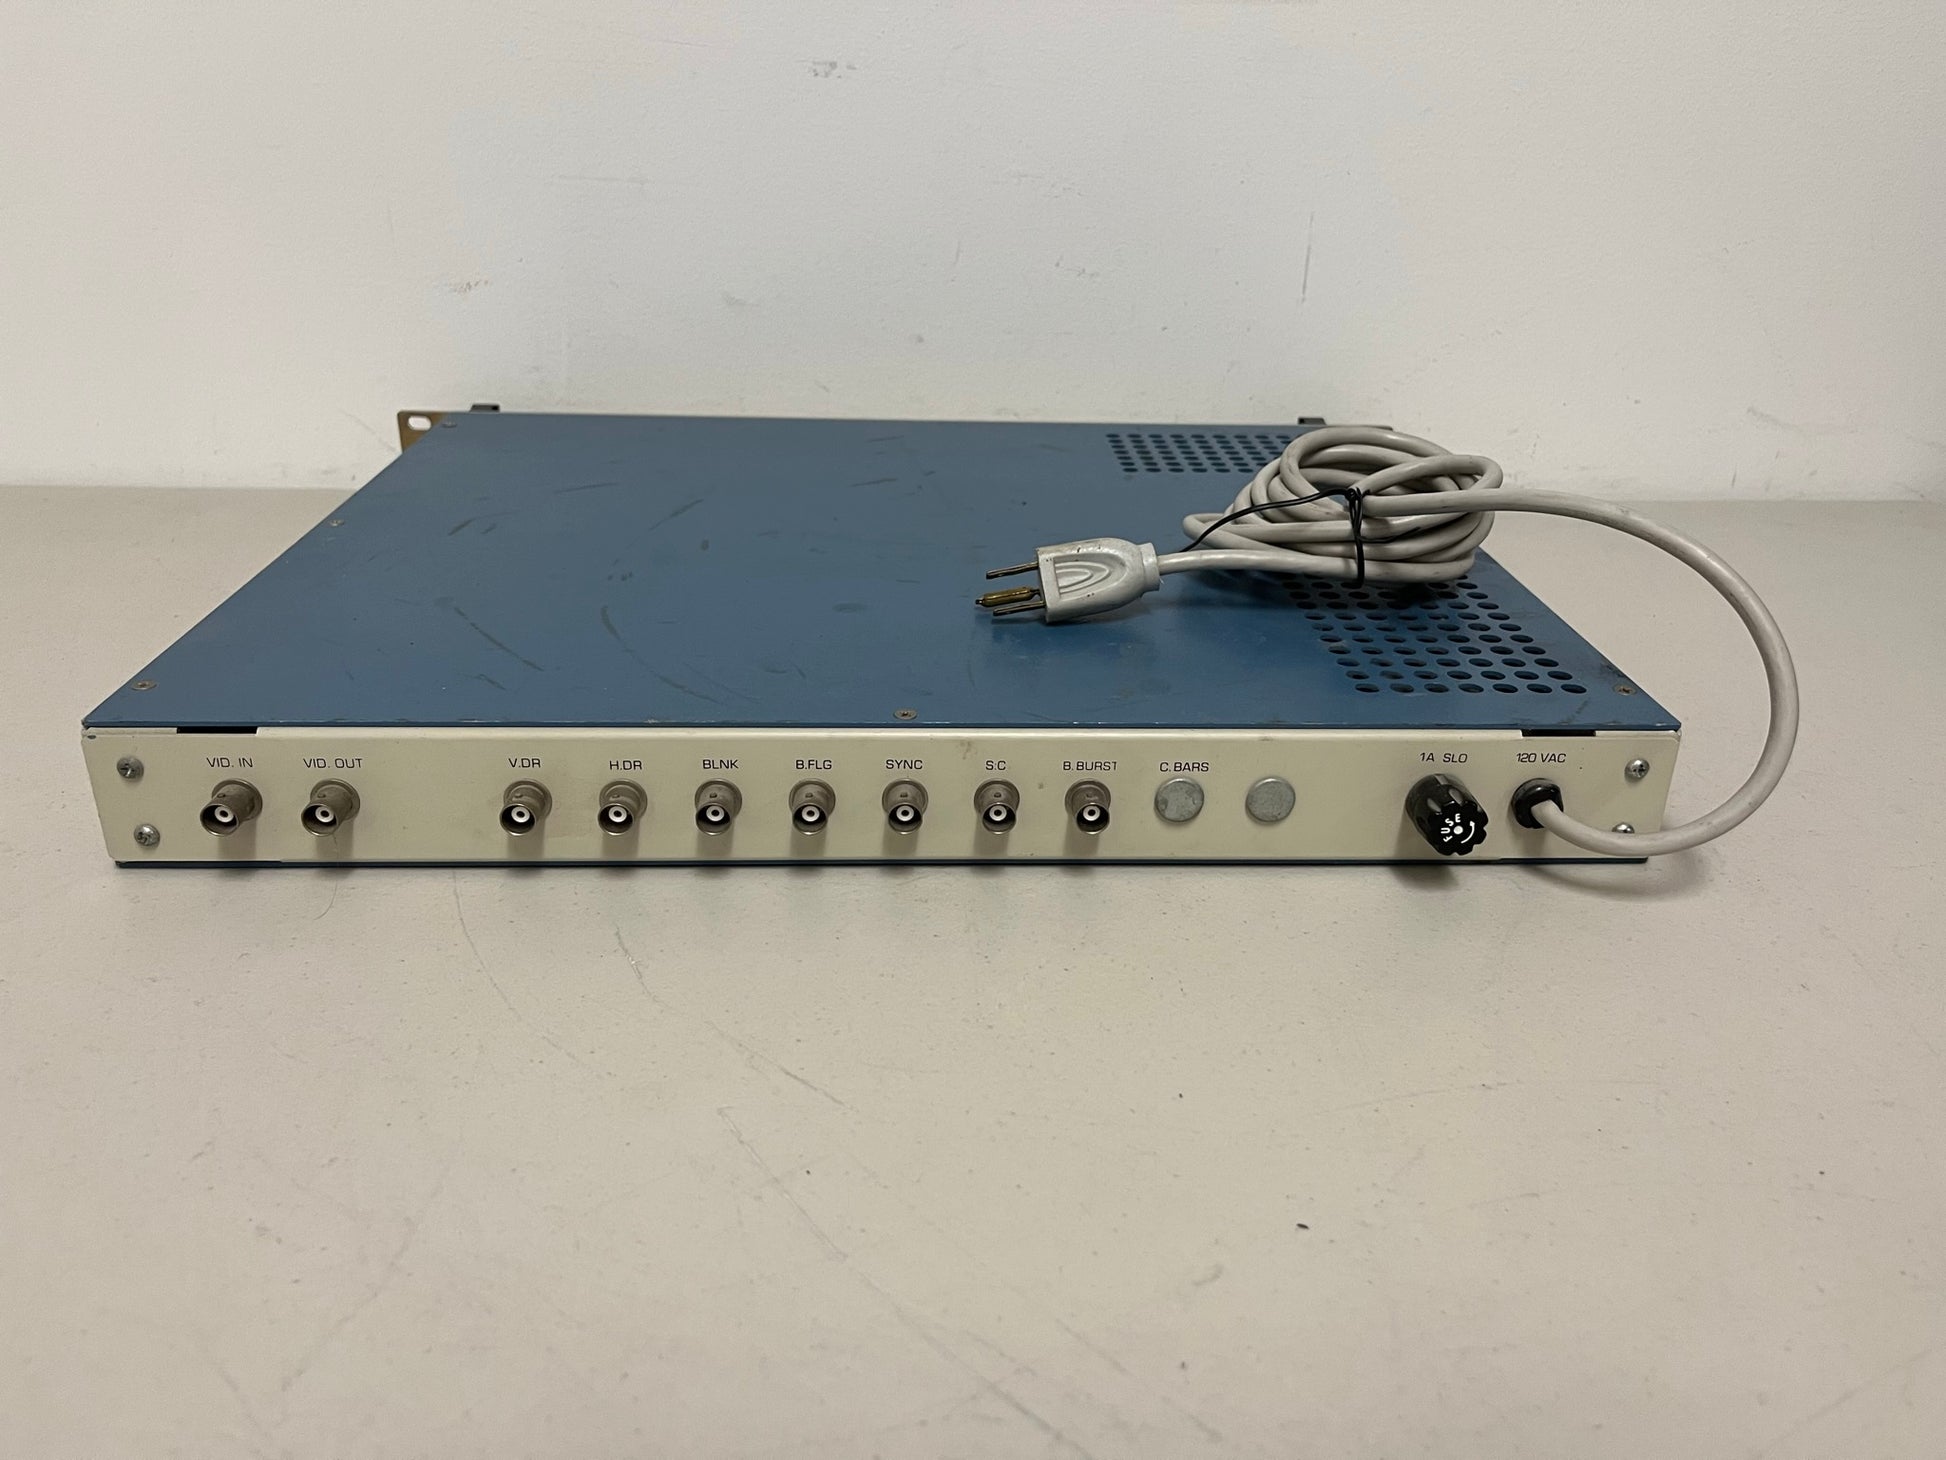 Used Sigma Electronics CSG-360 Color Sync Generator for Sale. We Sell Professional Audio Equipment. Audio Systems, Amplifiers, Consoles, Mixers, Electronics, Entertainment, Live Sound. 